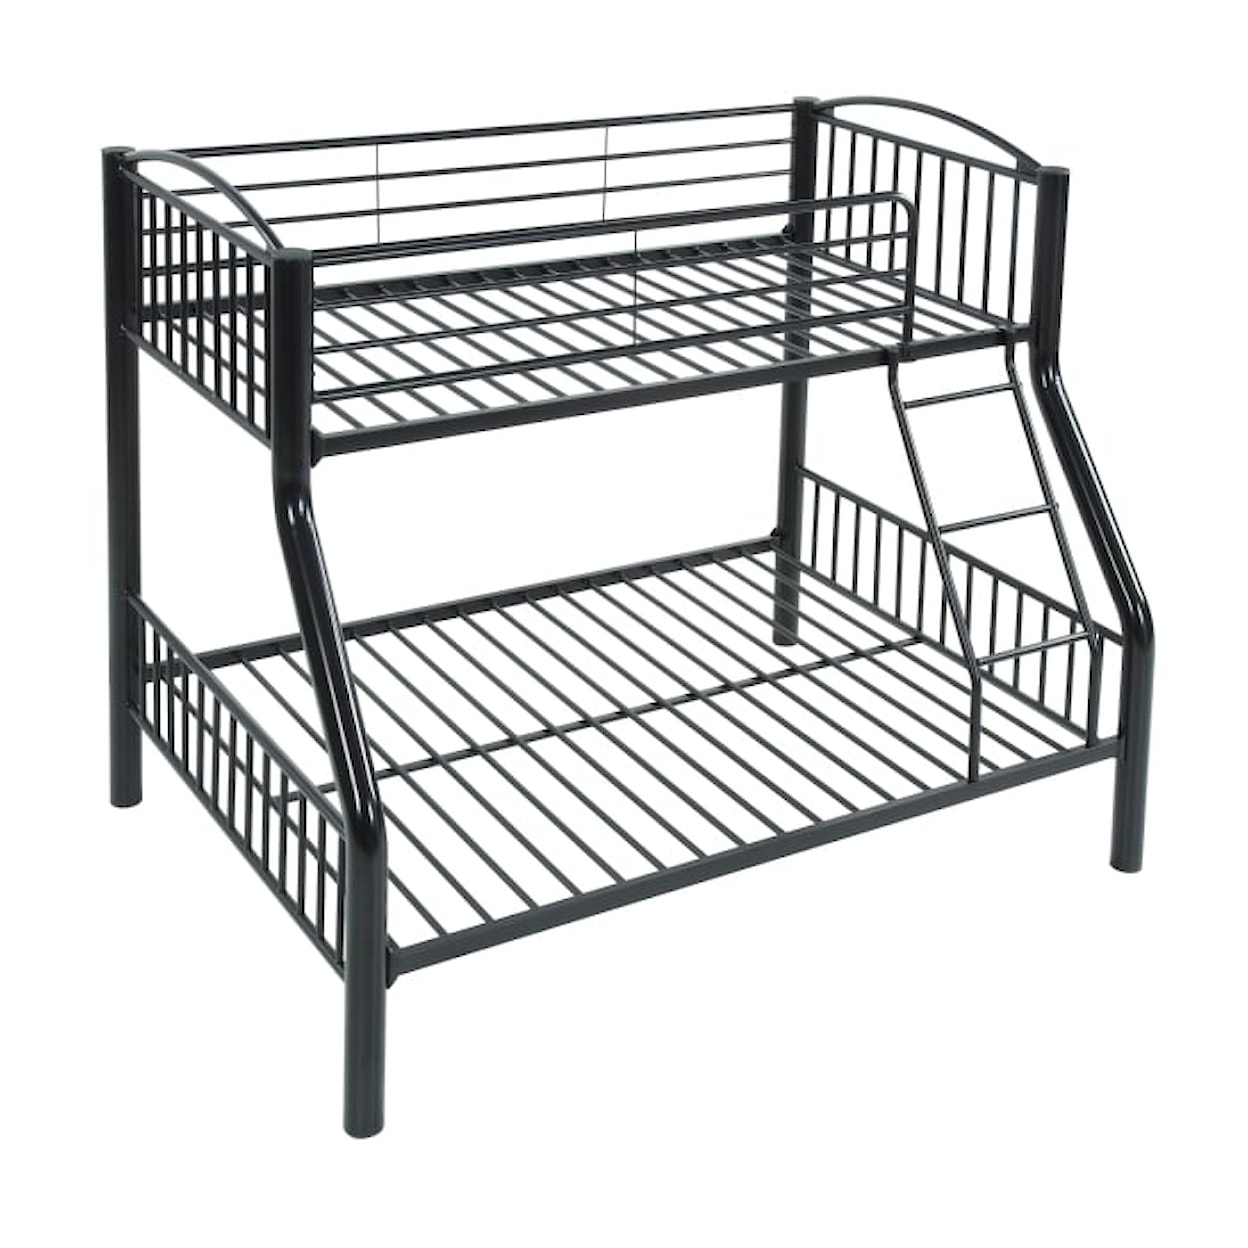 Homelegance Furniture Miscellaneous Twin/Full Bunk Bed